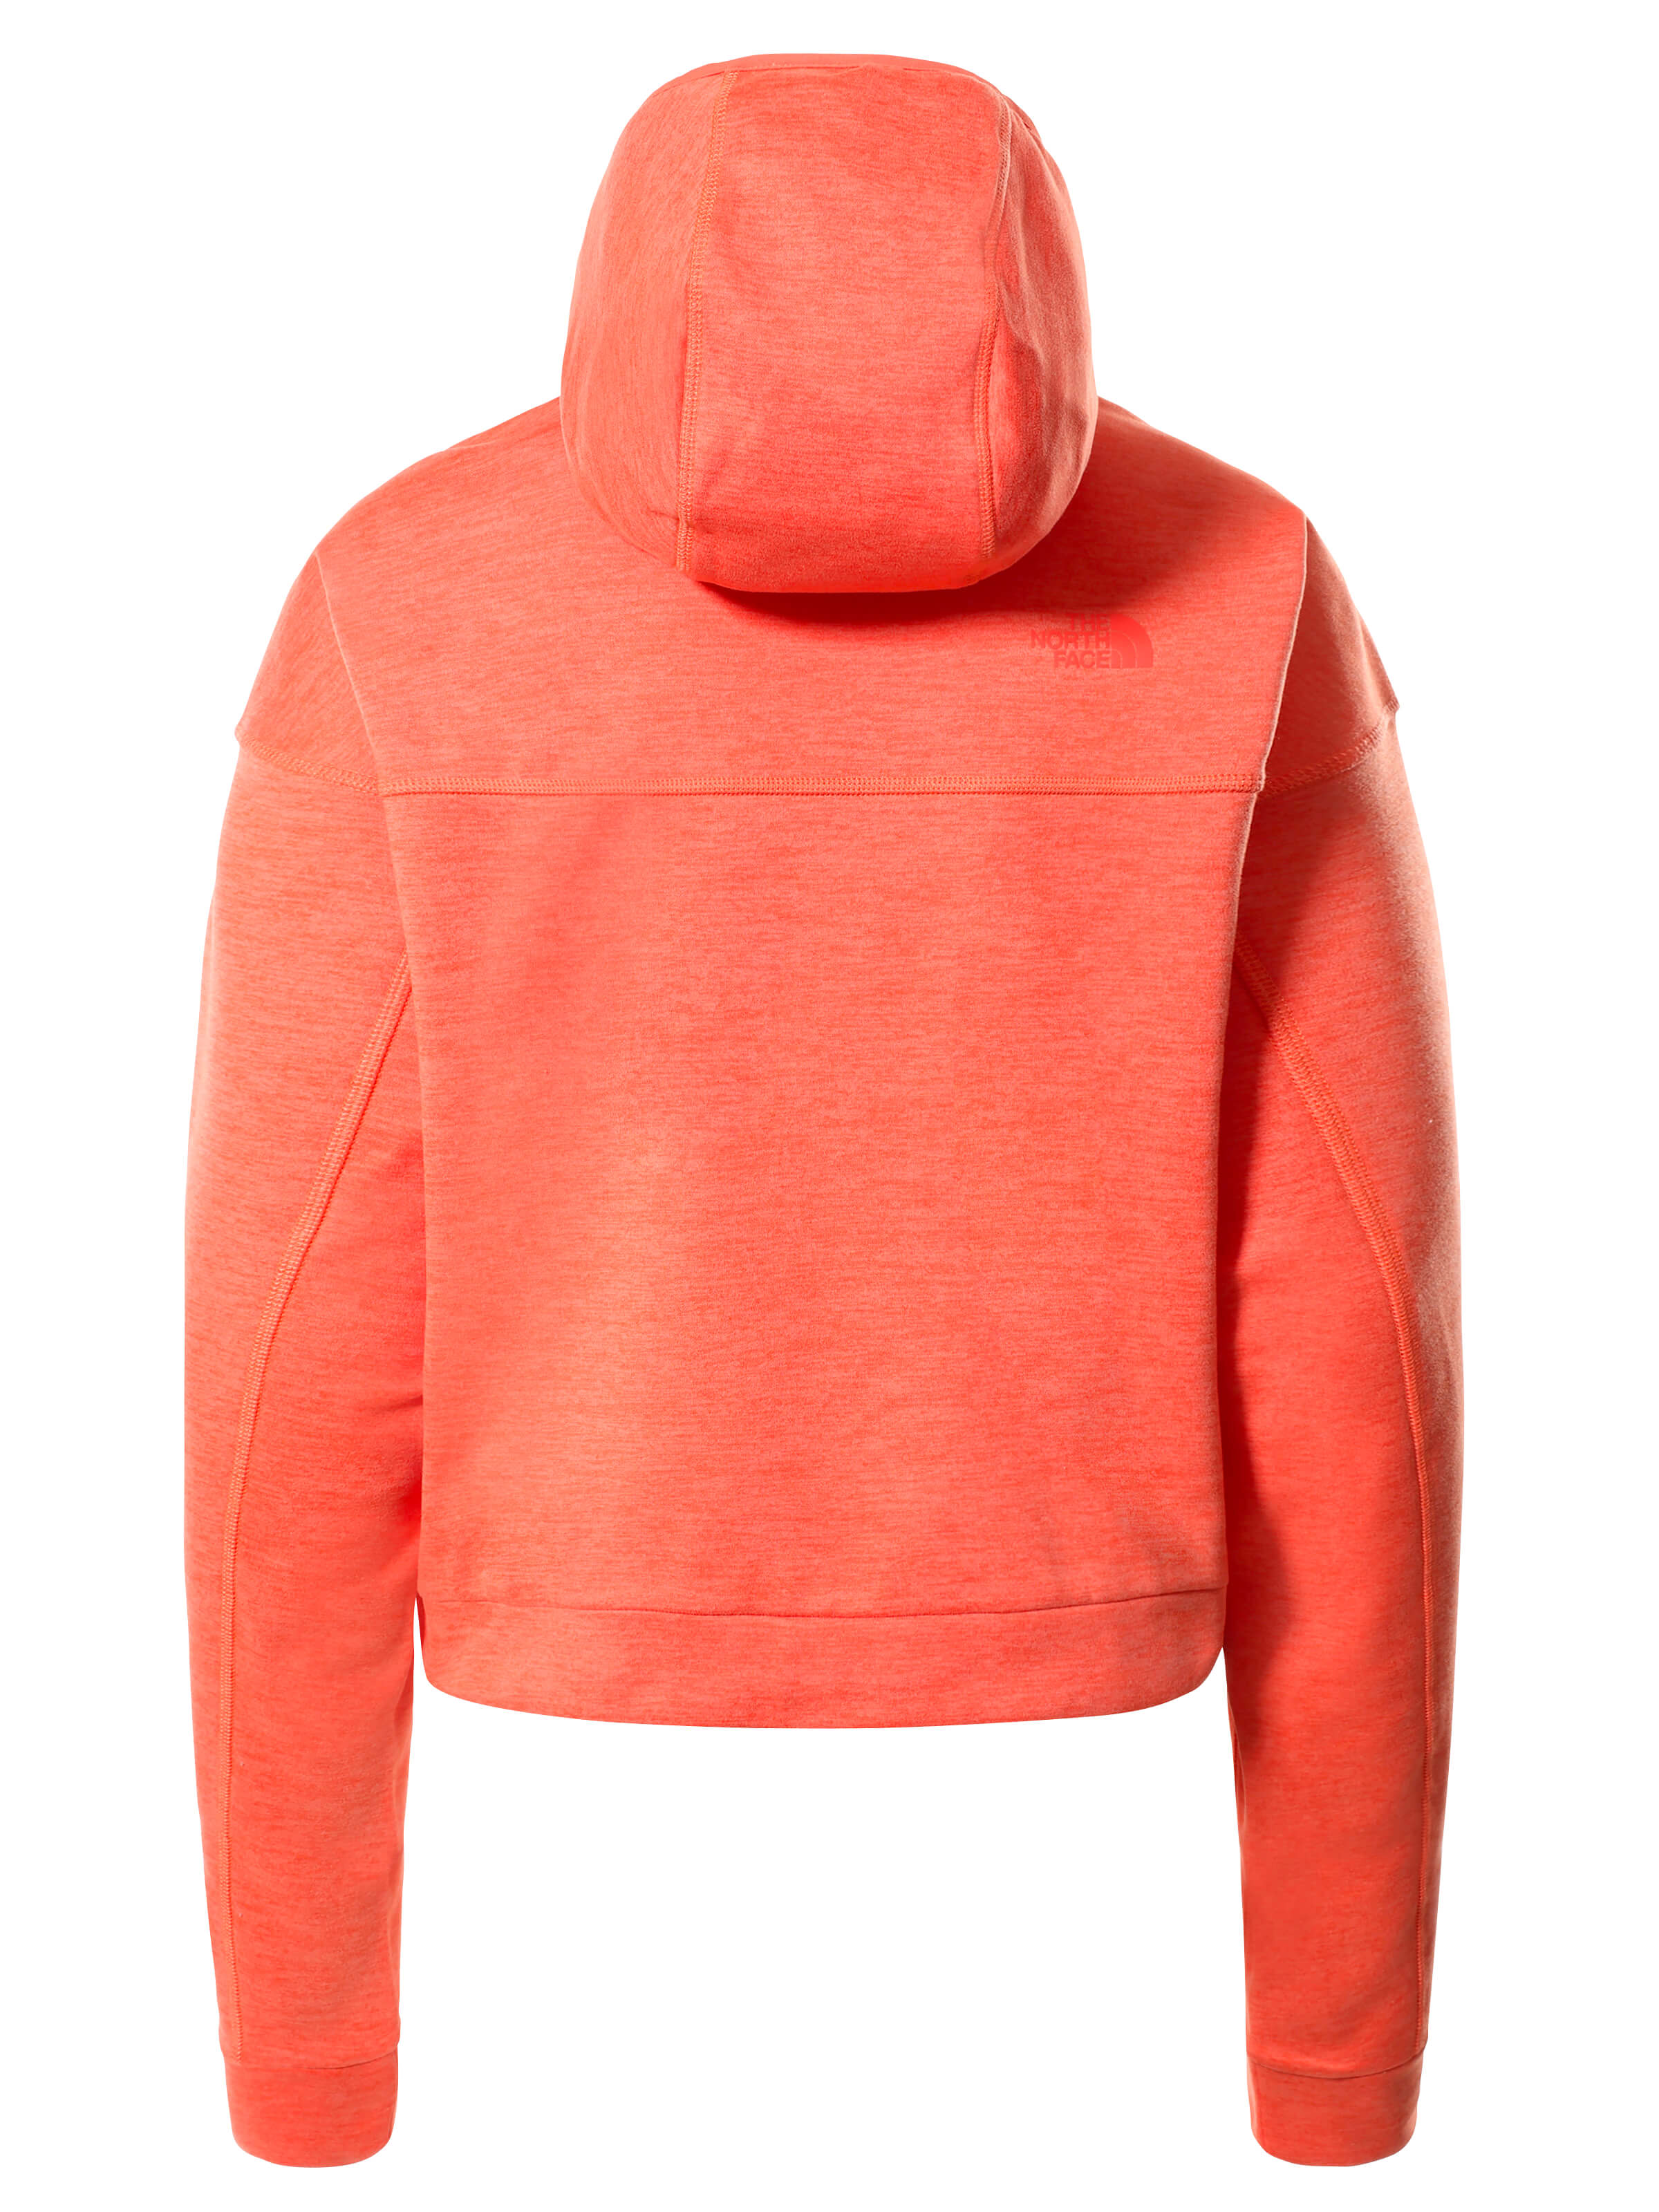 THE NORTH FACE Sweatshirt Canyonlands in Koralle 